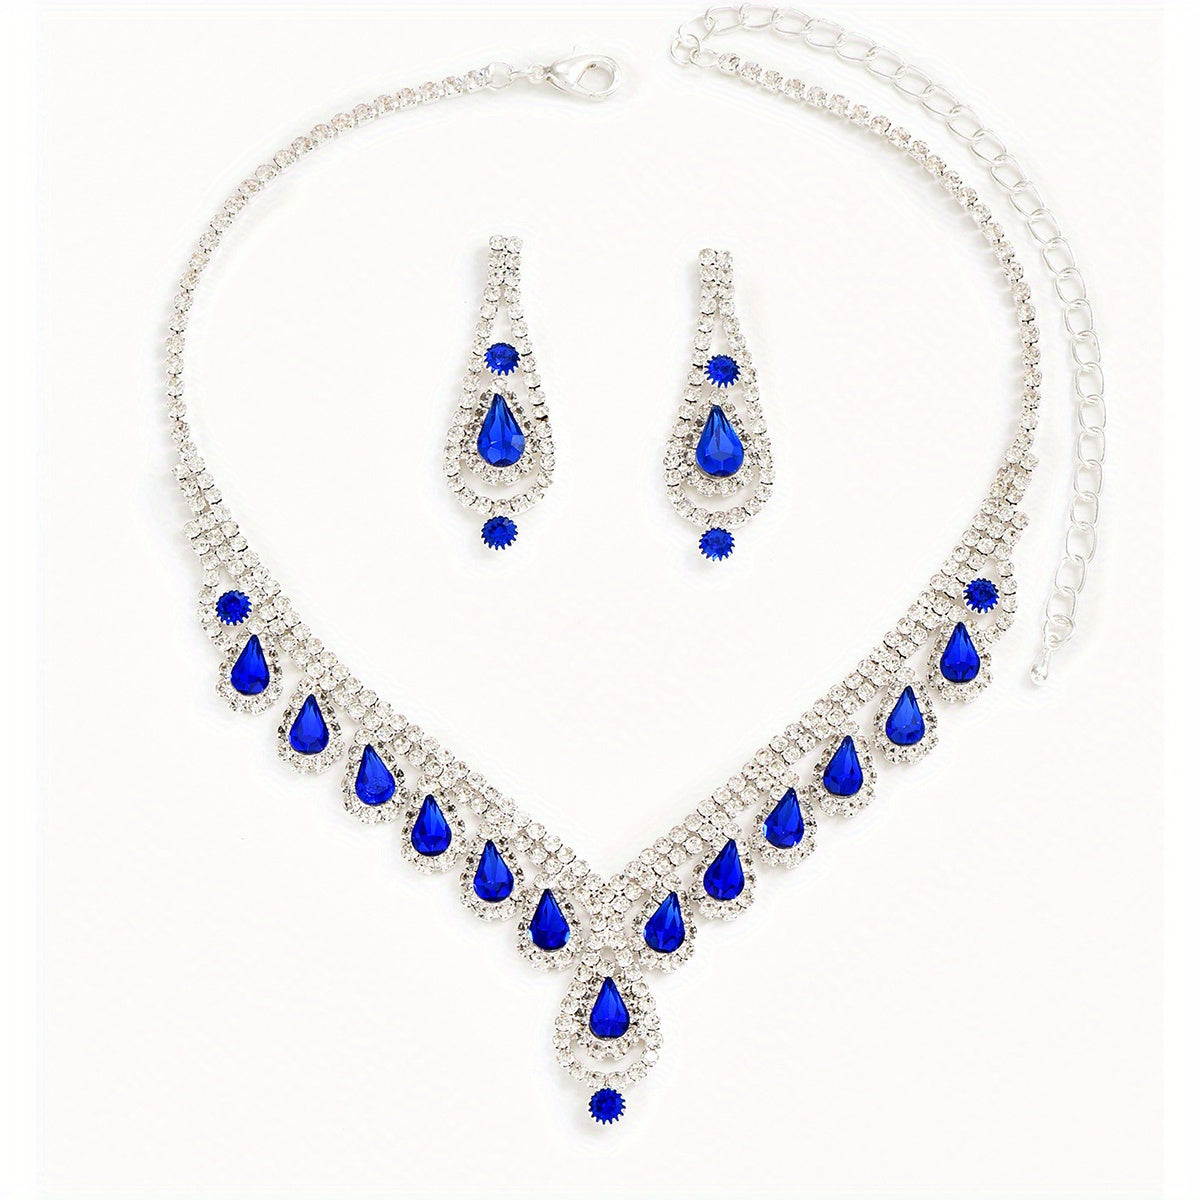 Elegant Jewelry Set with Shiny Synthetic Gems - Pendant Necklace and Drop Earrings